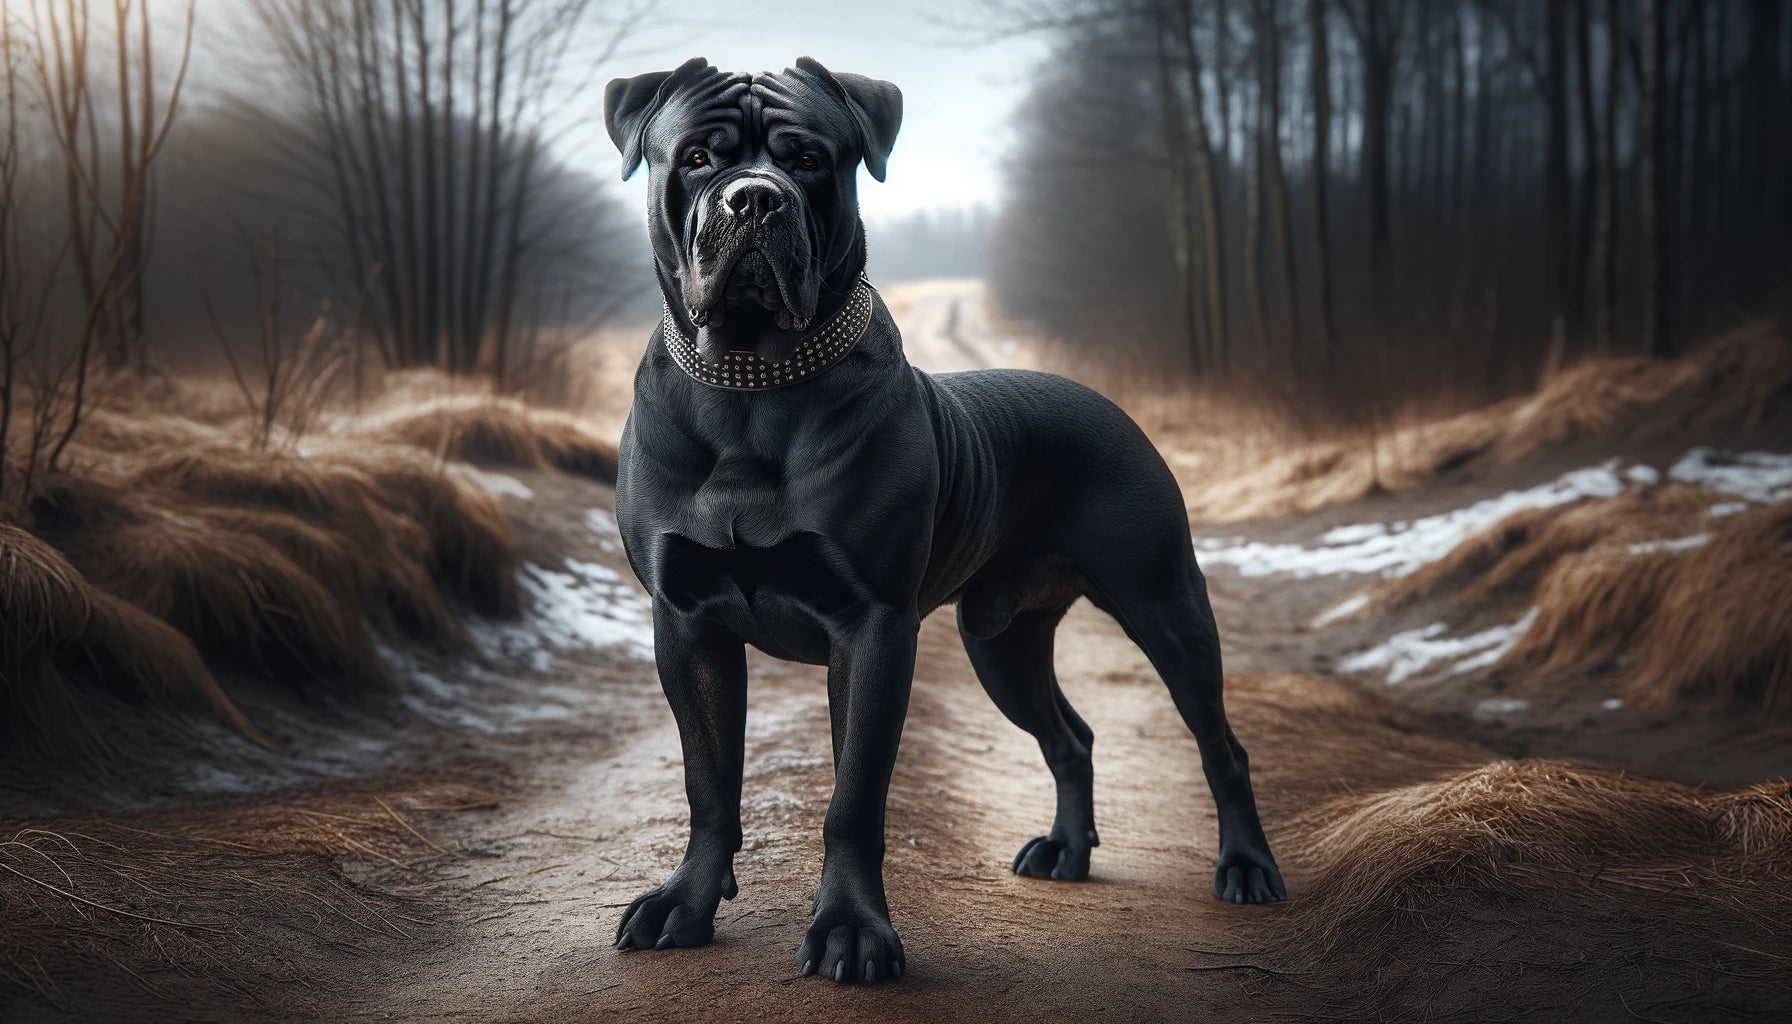 Muscular Cane Corso standing on a dirt path.